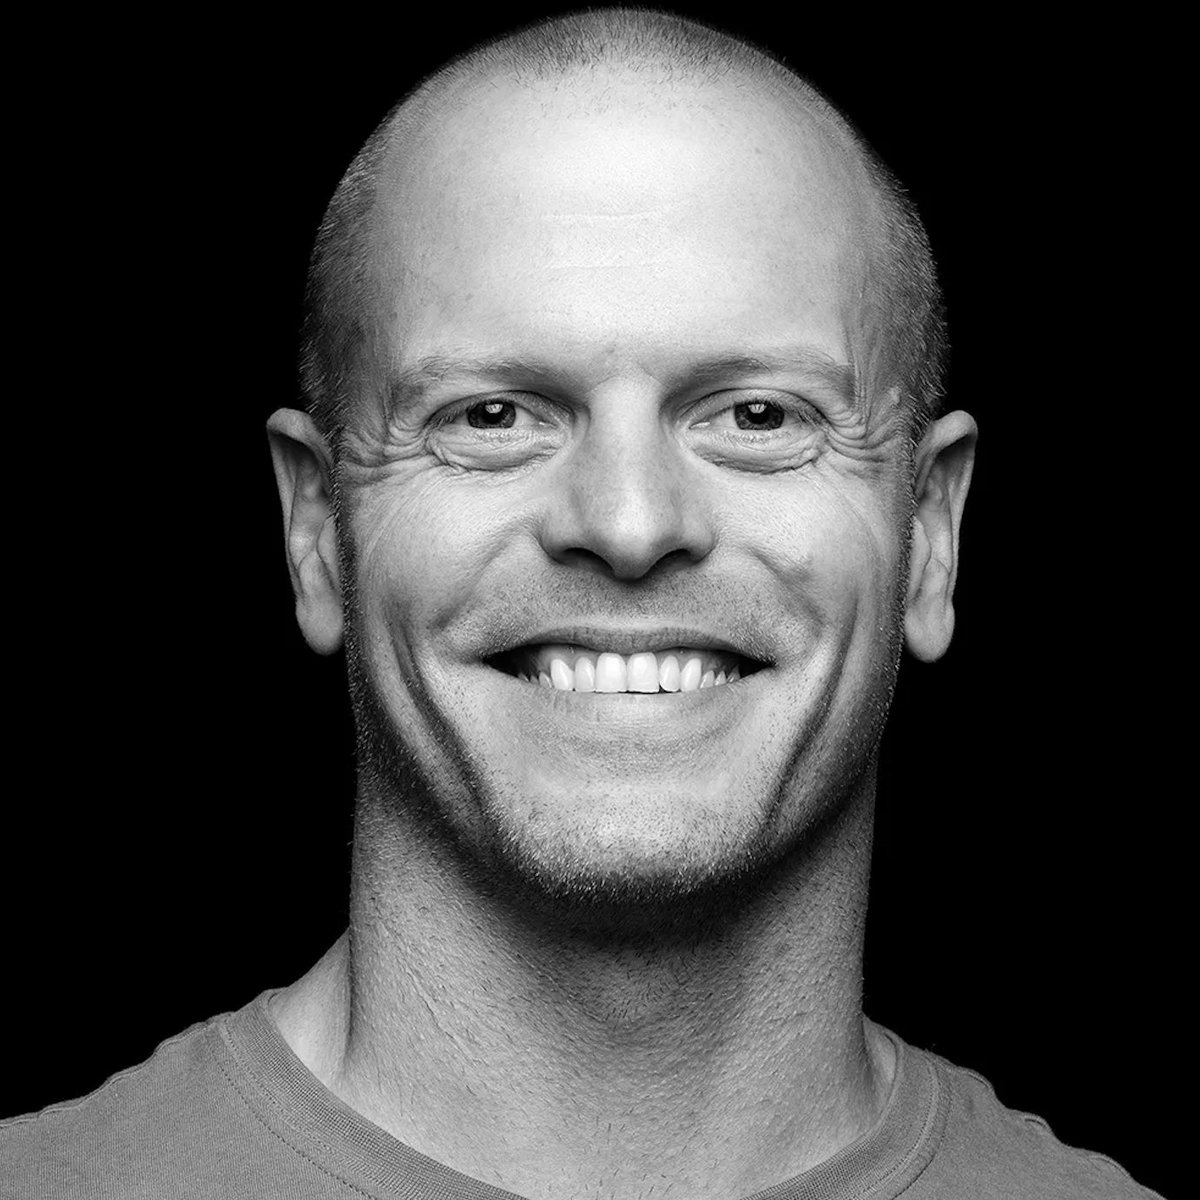 The New Age Philosopher. Tim Ferriss. He started a self development movement that made him a global icon. He has influenced countless lives, helping people achieve their dream bodies and their dream life. Achieve massive success and live your dream life with these methods.